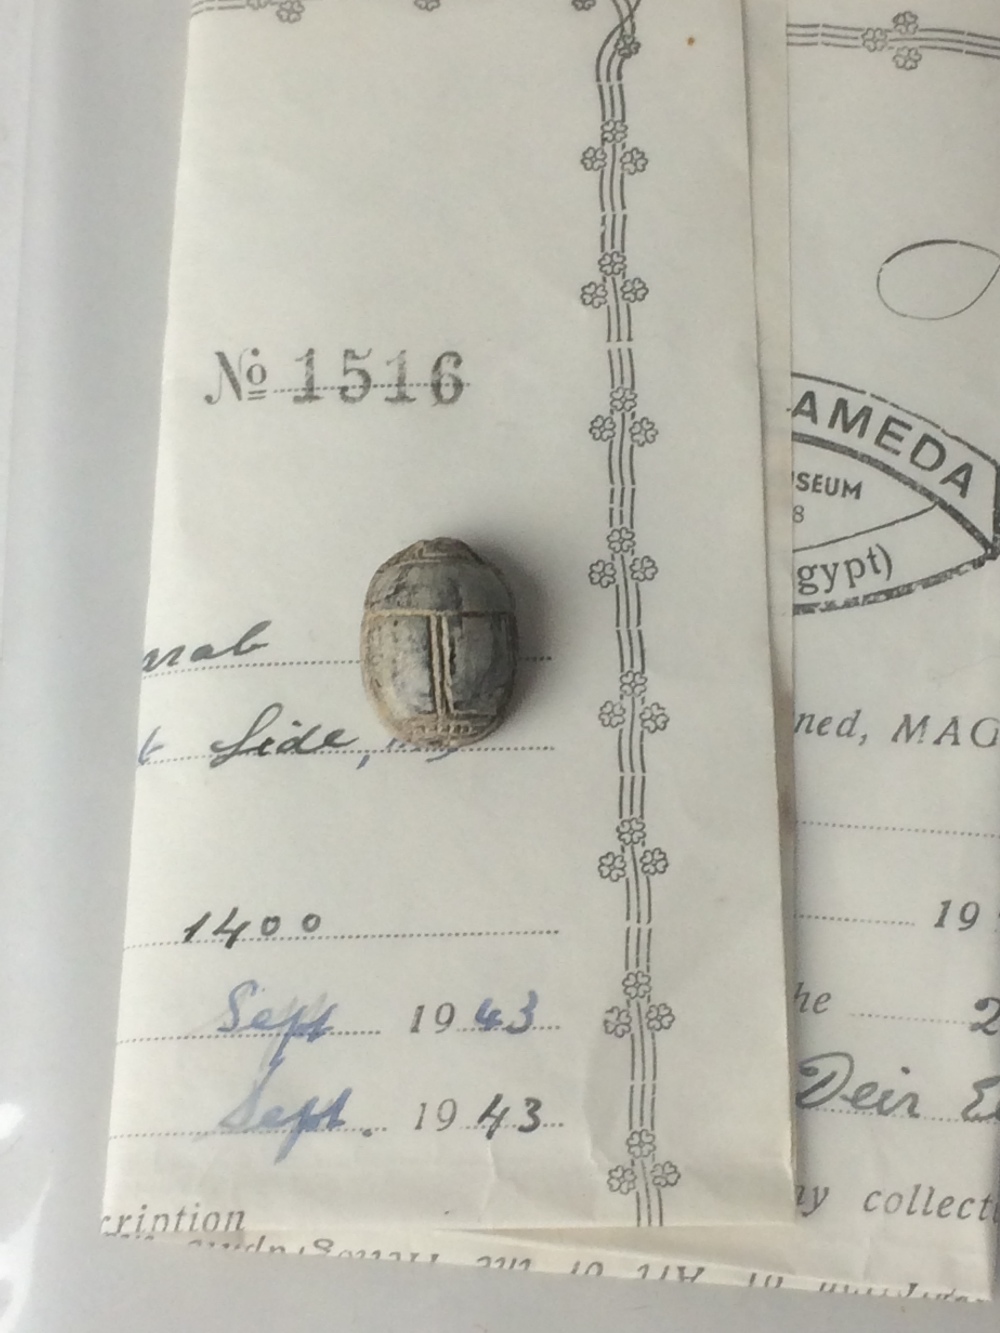 A collection of four Egyptian Scarabs, comprising an 18th Dynasty cream steatite scarab with - Image 5 of 6